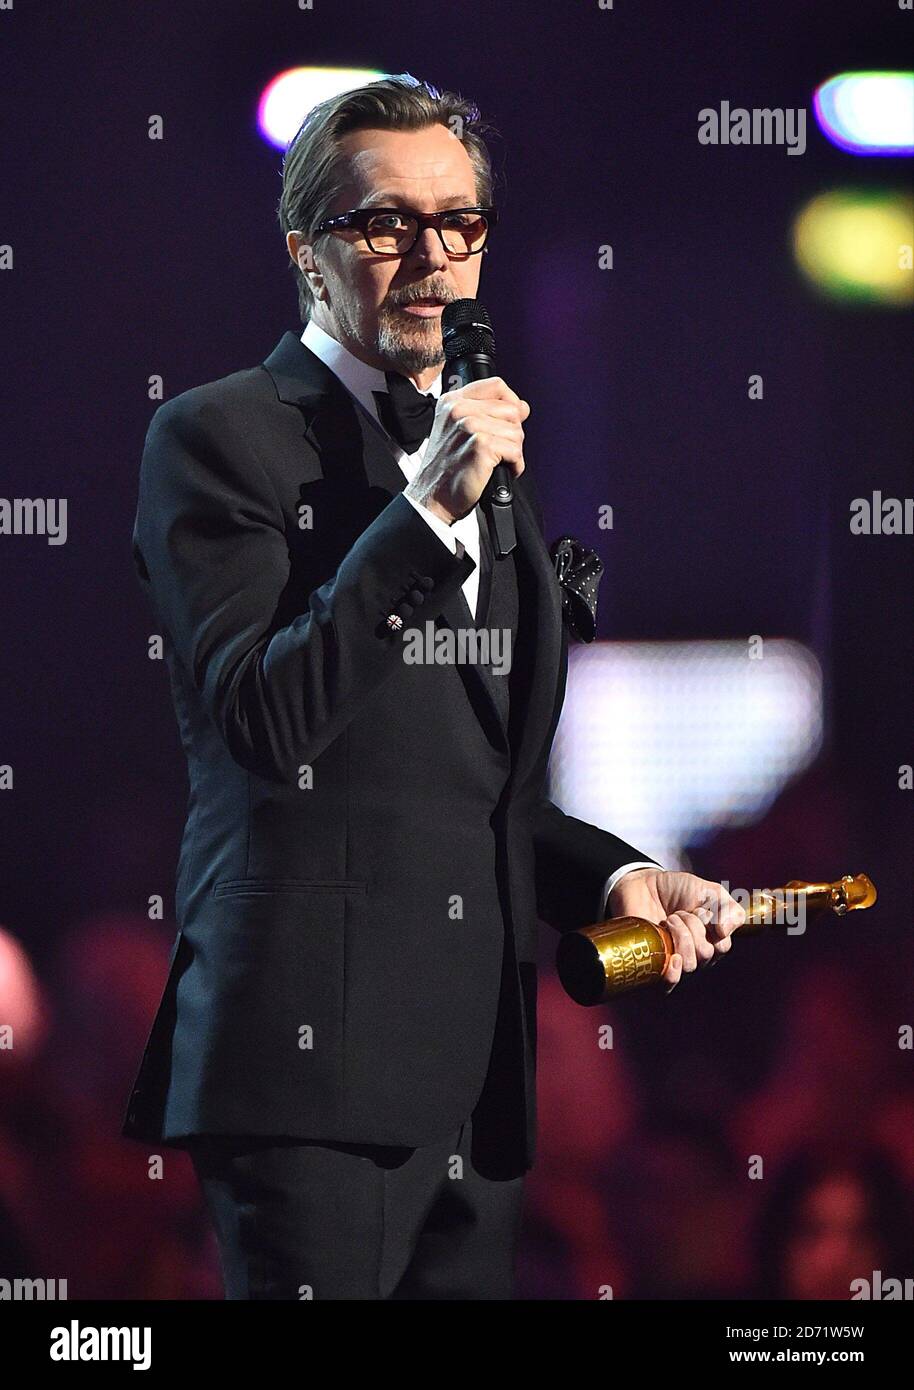 Gary Oldman accepts the Brits Icon Award on behalf of the late David Bowie on stage during the 2016 Brit Awards at the O2 Arena, London. Stock Photo